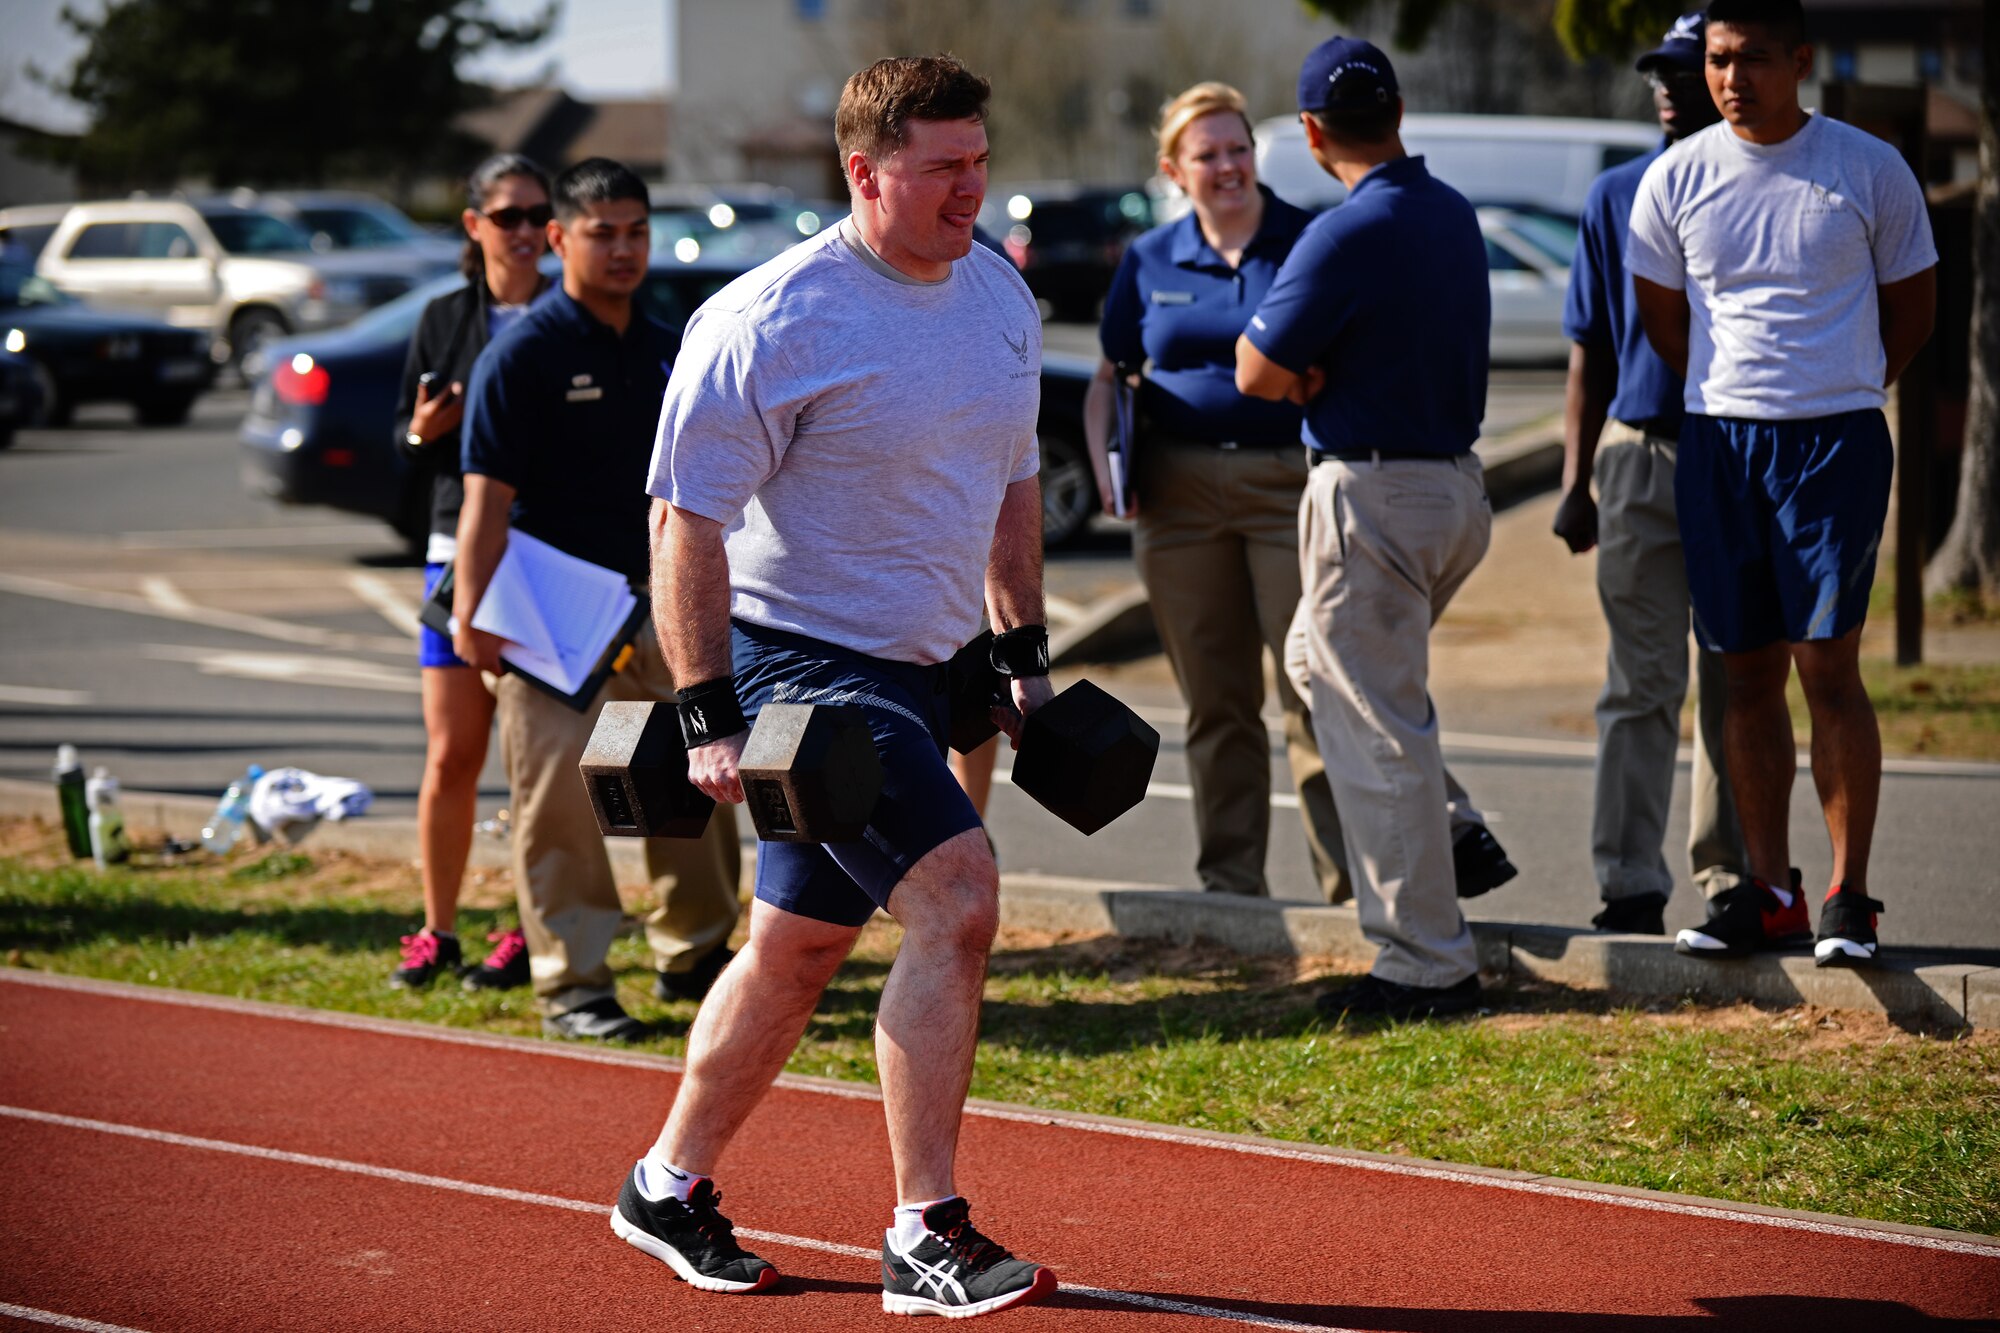 SPANGDAHLEM AIR BASE, Germany – Master Sgt. Carlos Crasta, 52nd Component Maintenance Squadron, runs while holding two 85 pound dumbbells during the Iron Flight Competition at the track here March 28. The quarterly competition is an incentive program intended to build comraderie and test the mental and physical endurance of the participating squadron members. Four teams participated in the six-person team competition that consisted of three different events. The 52nd Equipment Maintenance Squadron ammo team won the competition after a three-way tie-breaker rope-climbing event against the 52nd Civil Engineer Squadron and CMS. (U.S. Air Force photo by Airman 1st Class Matthew B. Fredericks/Released)